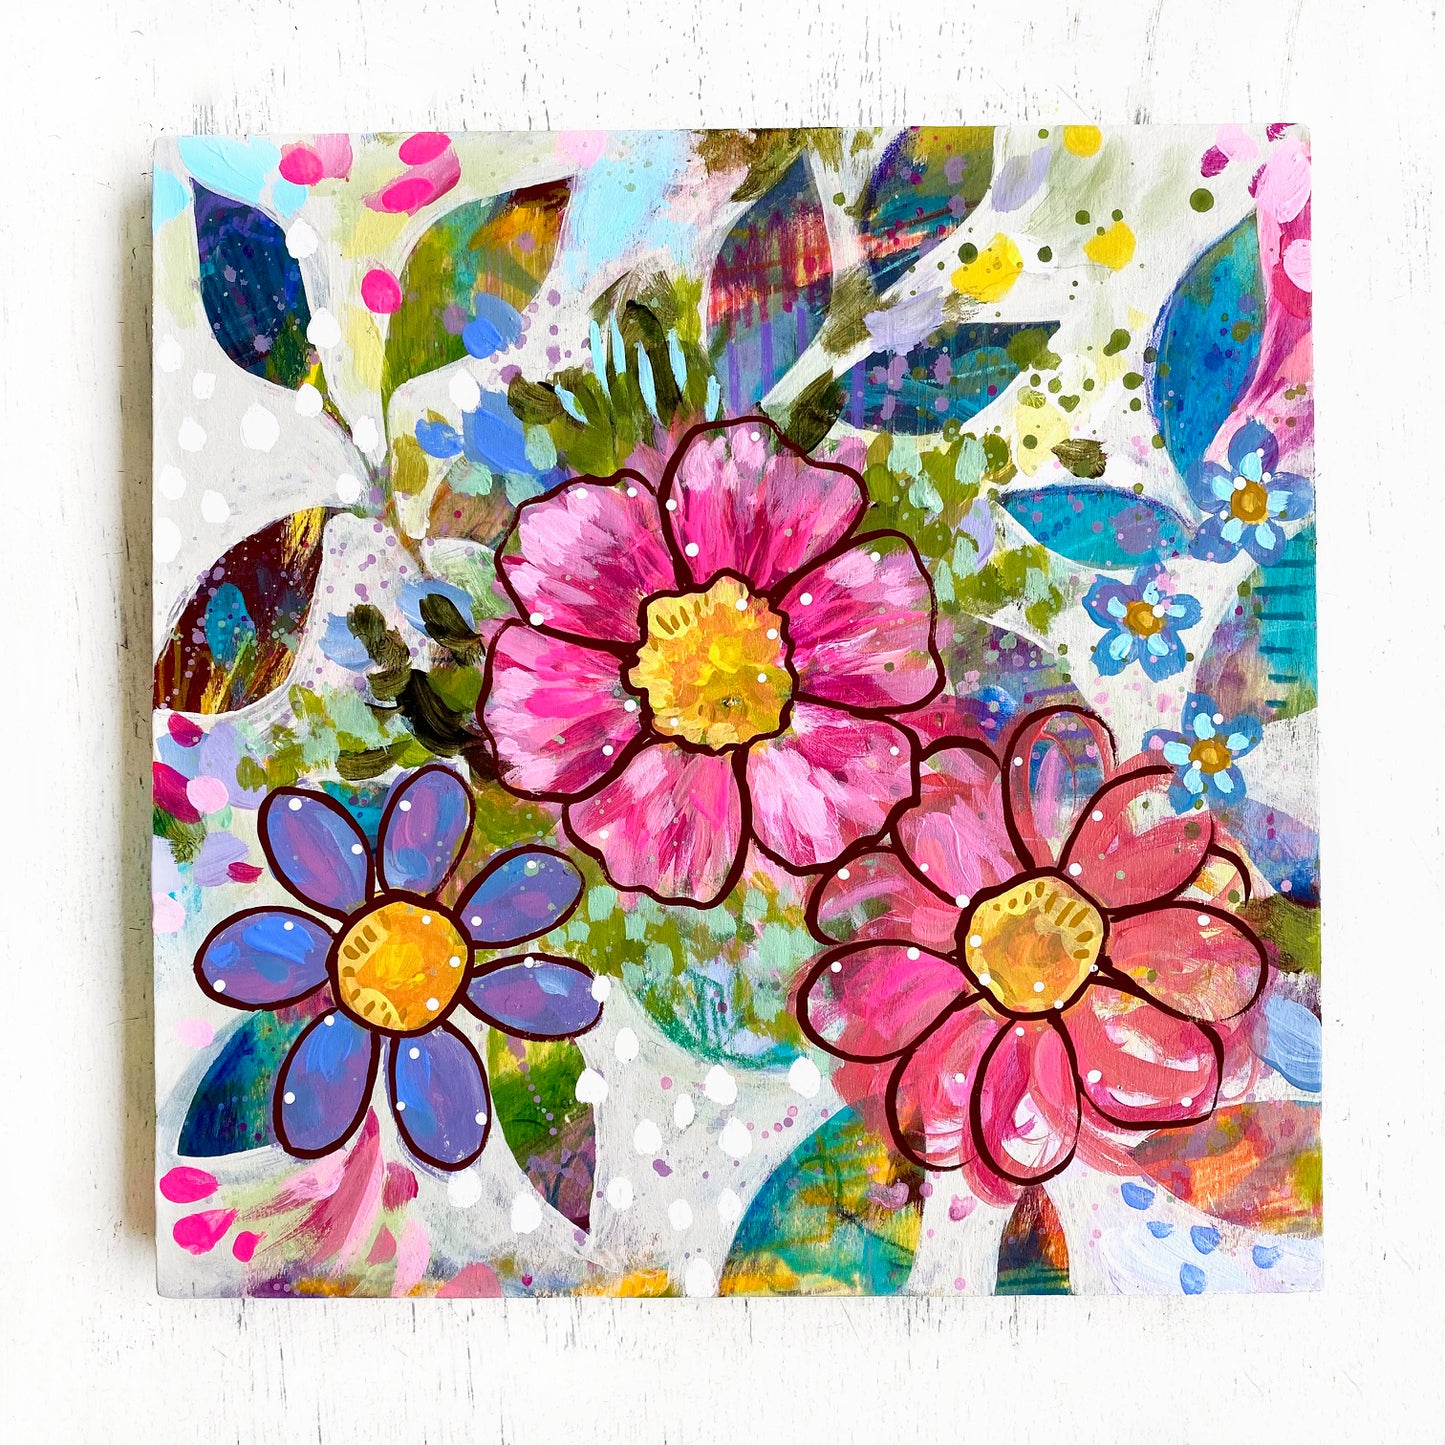 "Our Story Begins at Home" Floral Original Painting on 8x8 inch Wood Panel - Bethany Joy Art